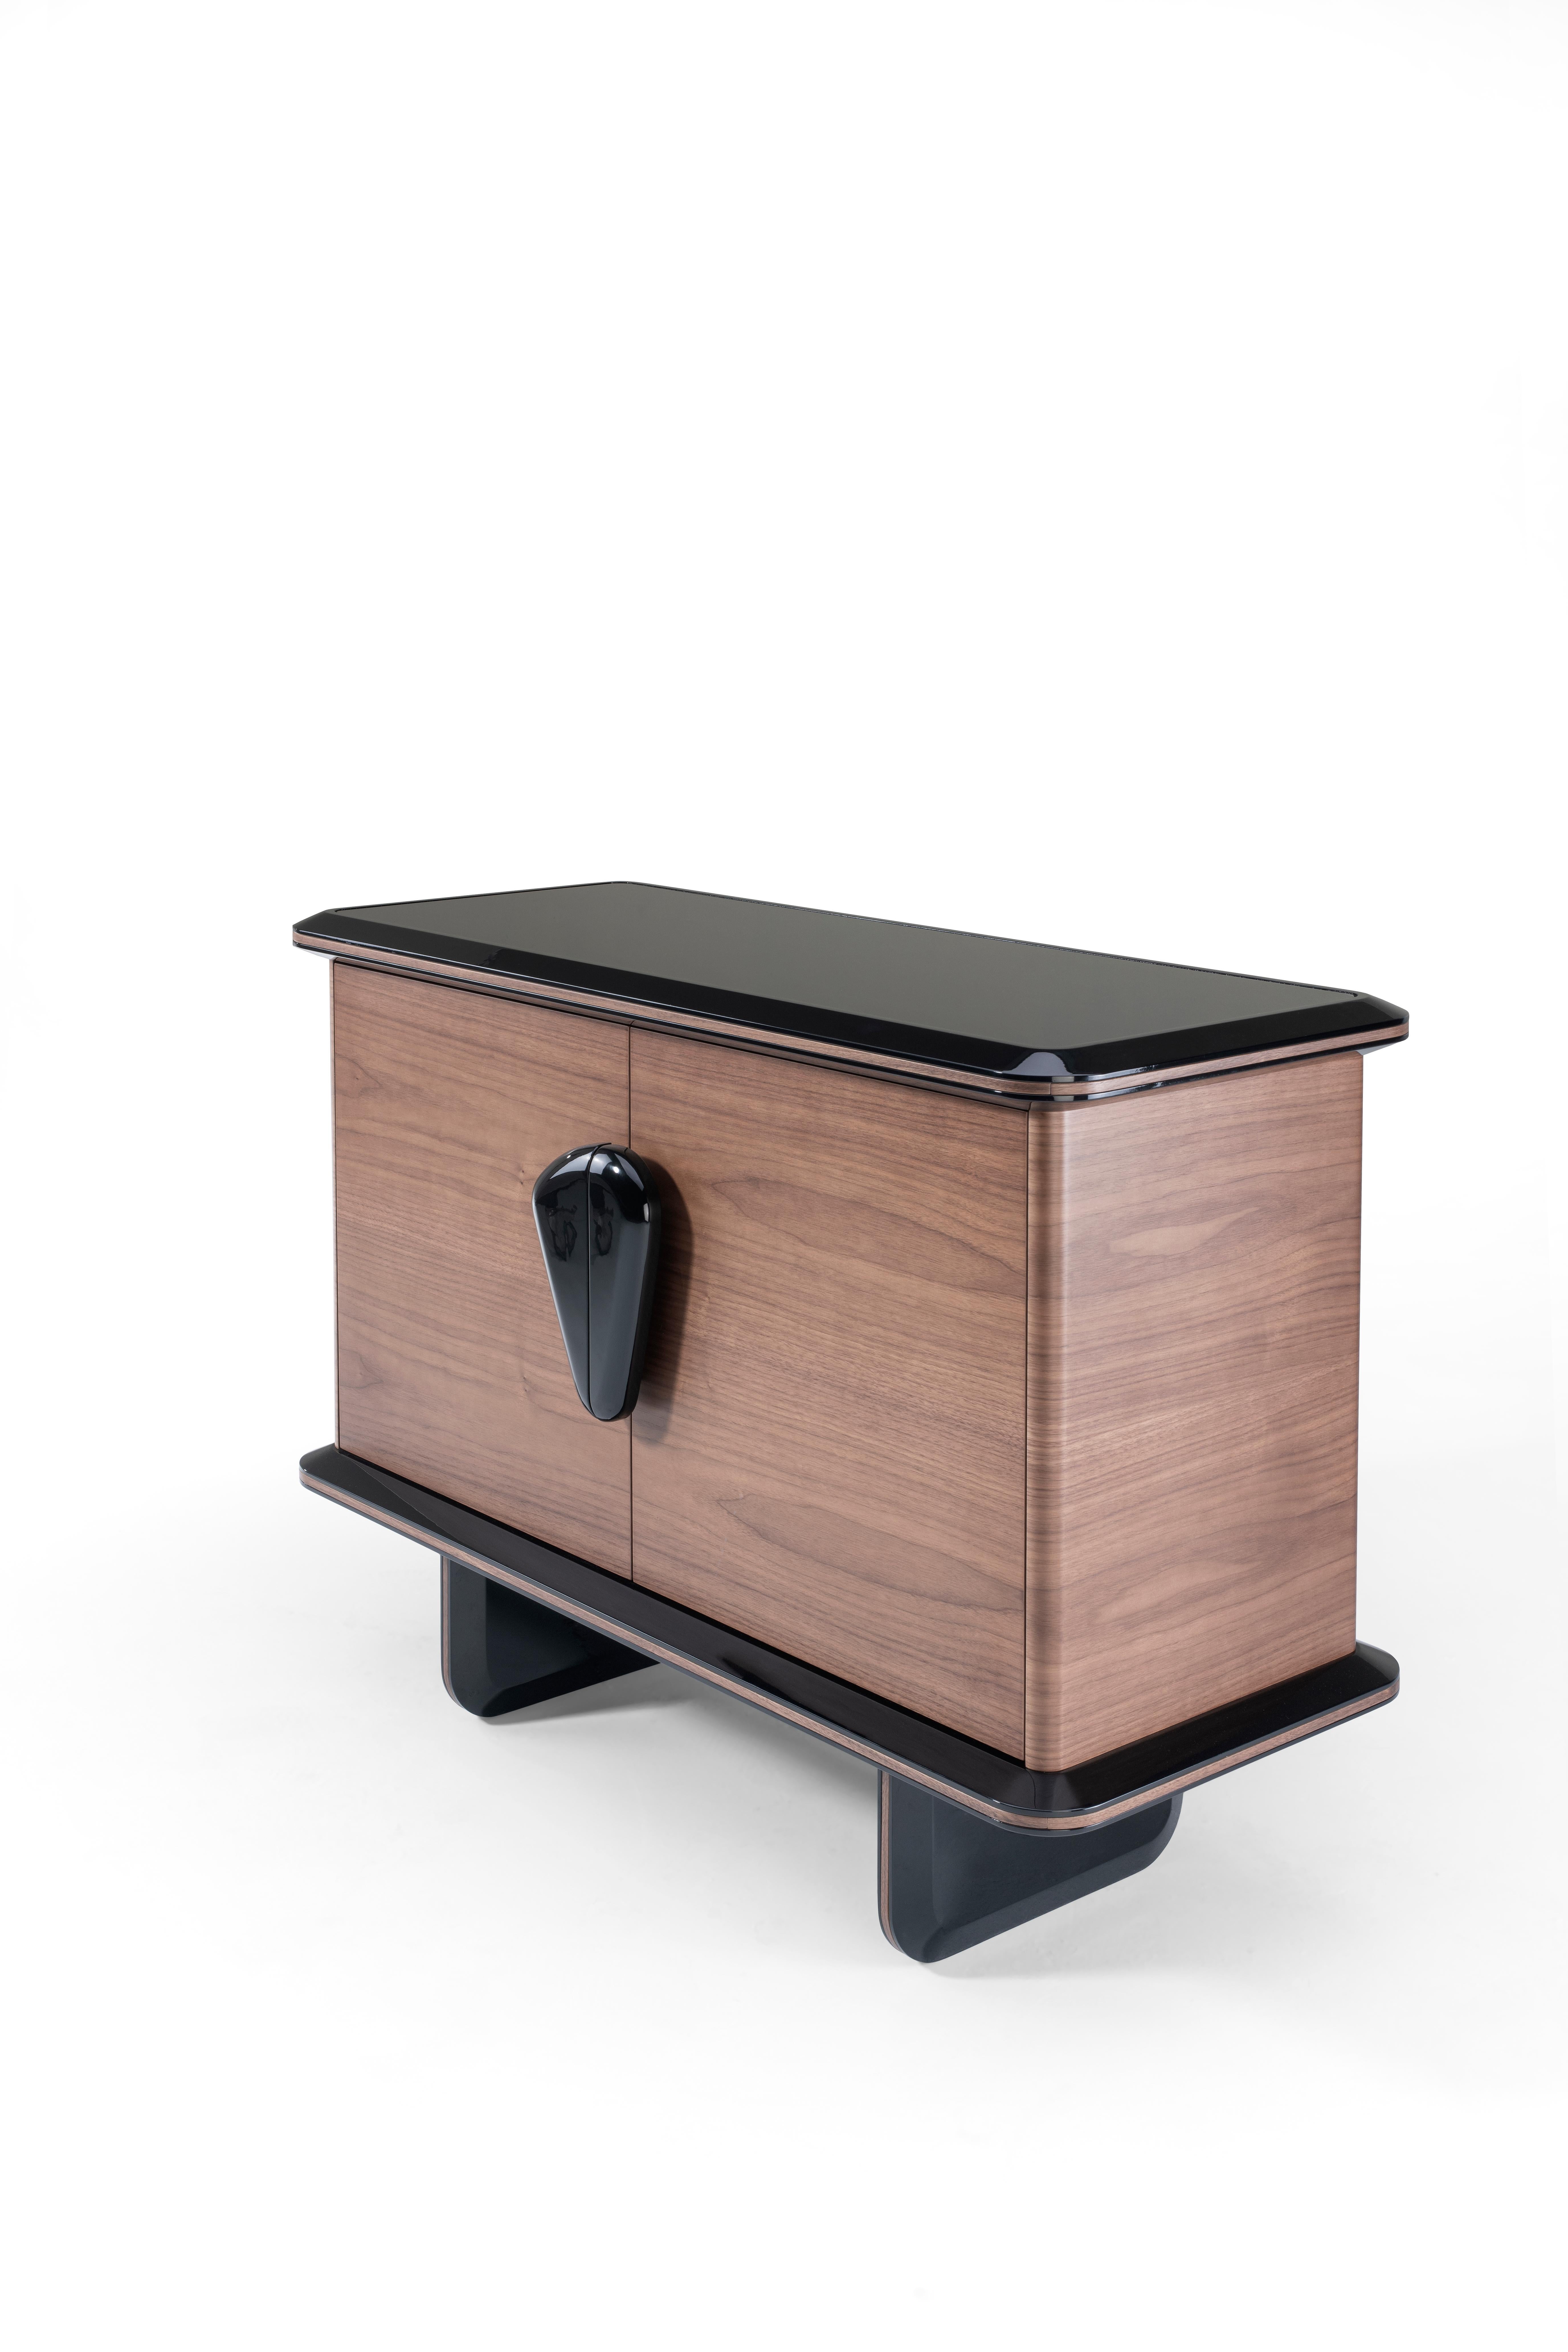 The N’ZUZI 2-door sideboard is a piece of furniture with an original and unique design. Its distinctive shape has rounded corners adorned by black glass on top. The exclusive design of the handles brings sophistication to this piece of furniture,